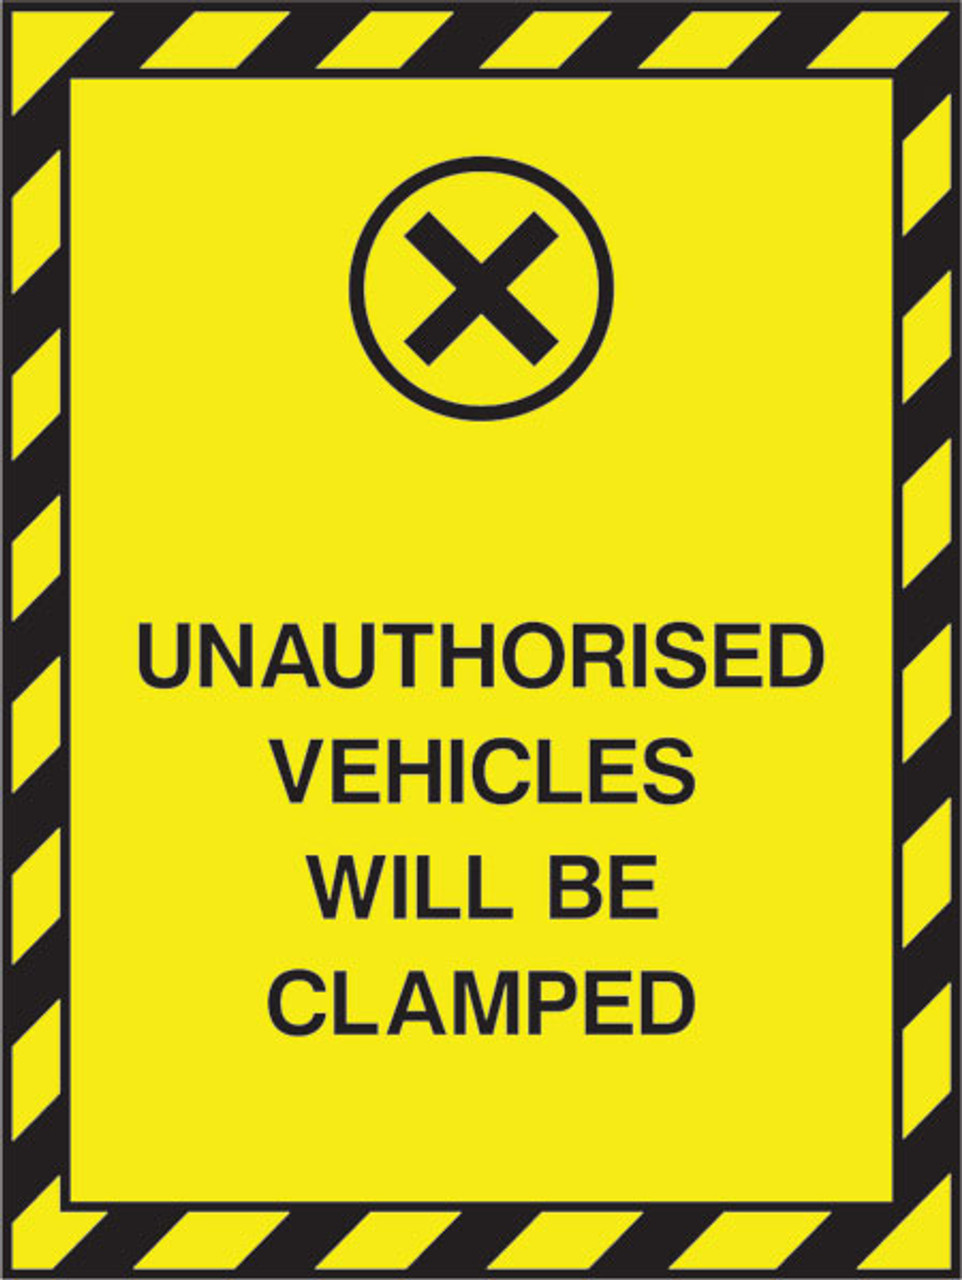 Unauthorised vehicles will be clamped.